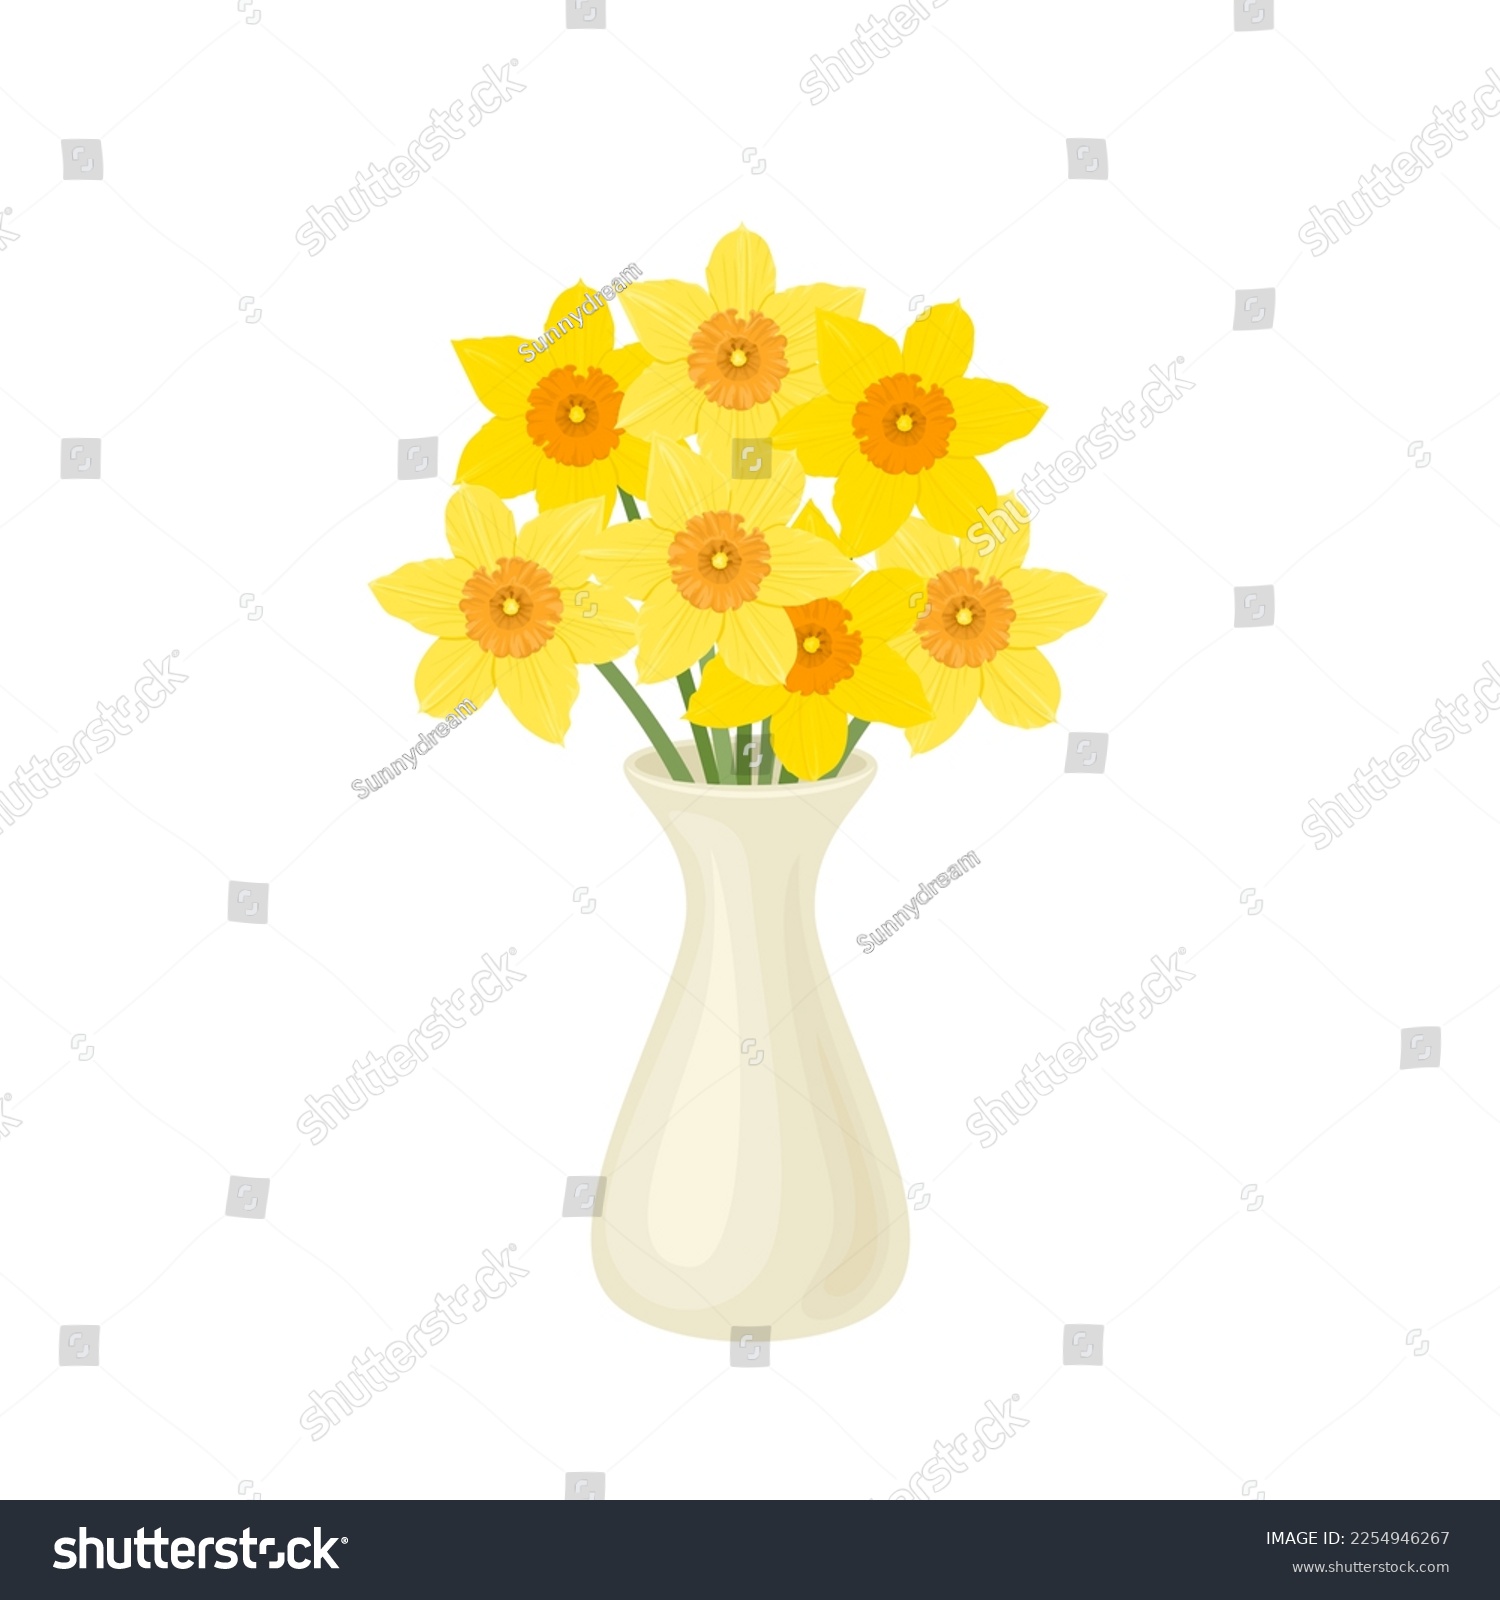 SVG of Yellow daffodils in a white vase isolated. Vector cartoon illustration of beautiful spring flowers. svg